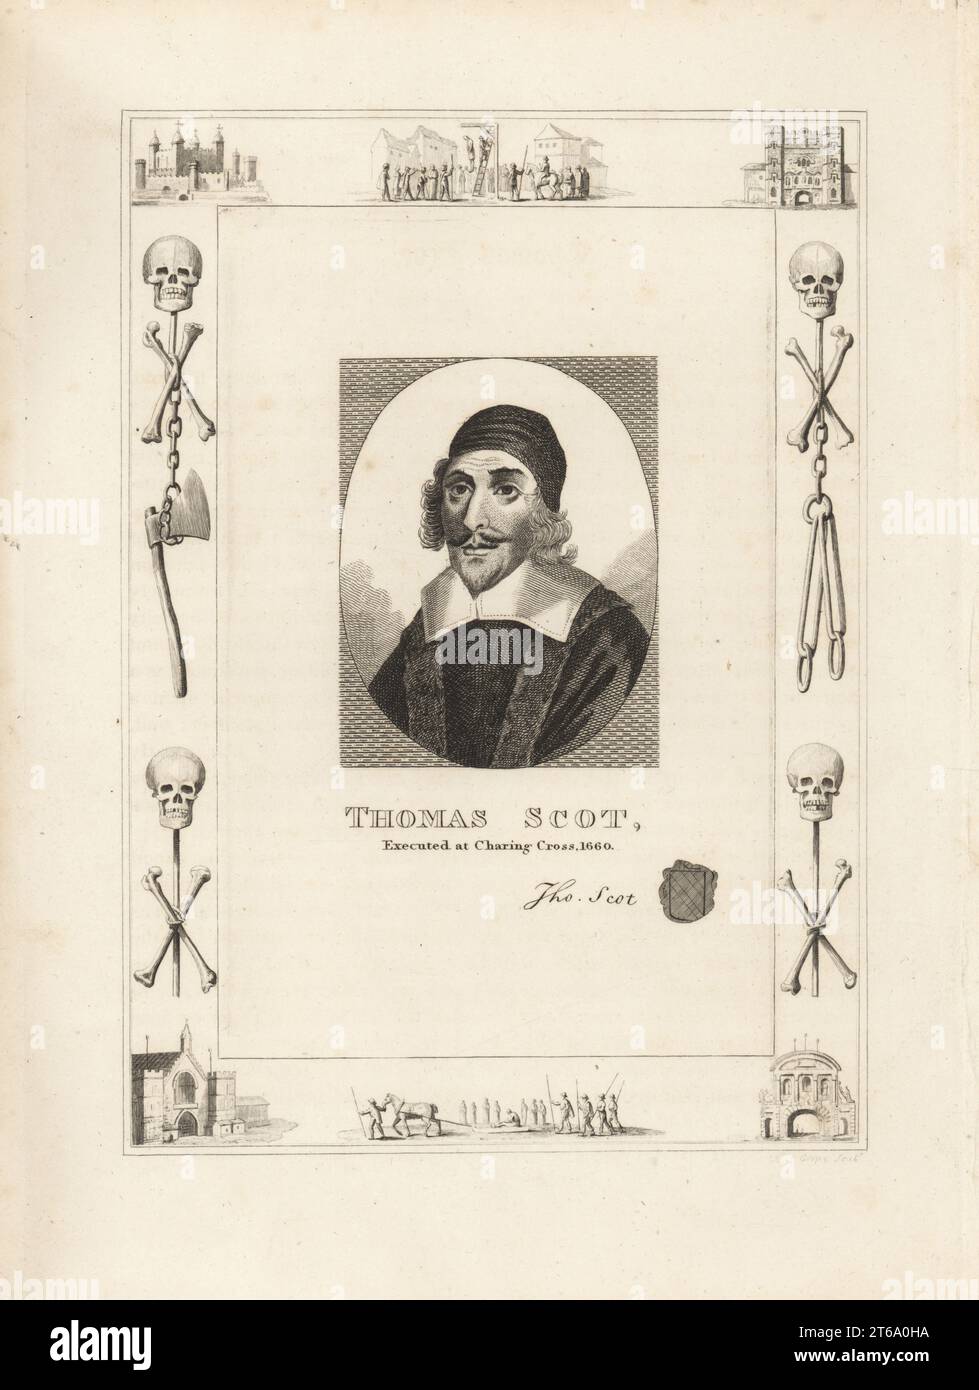 Thomas Scot, executed at Charing Cross in 1660. English politician and regicide, tried and hanged, drawn and quartered. With his autograph and seal. Within a frame decorated with vignettes of skull and cross bones, chains and executioners axe, a man hanging from a gibbet at Tyburn, a condemned man on a sled, the Tower of London, Newgate Prison. Copperplate engraving by Robert Cooper from James Caulfields The High Court of Justice, London, 1820. Stock Photo